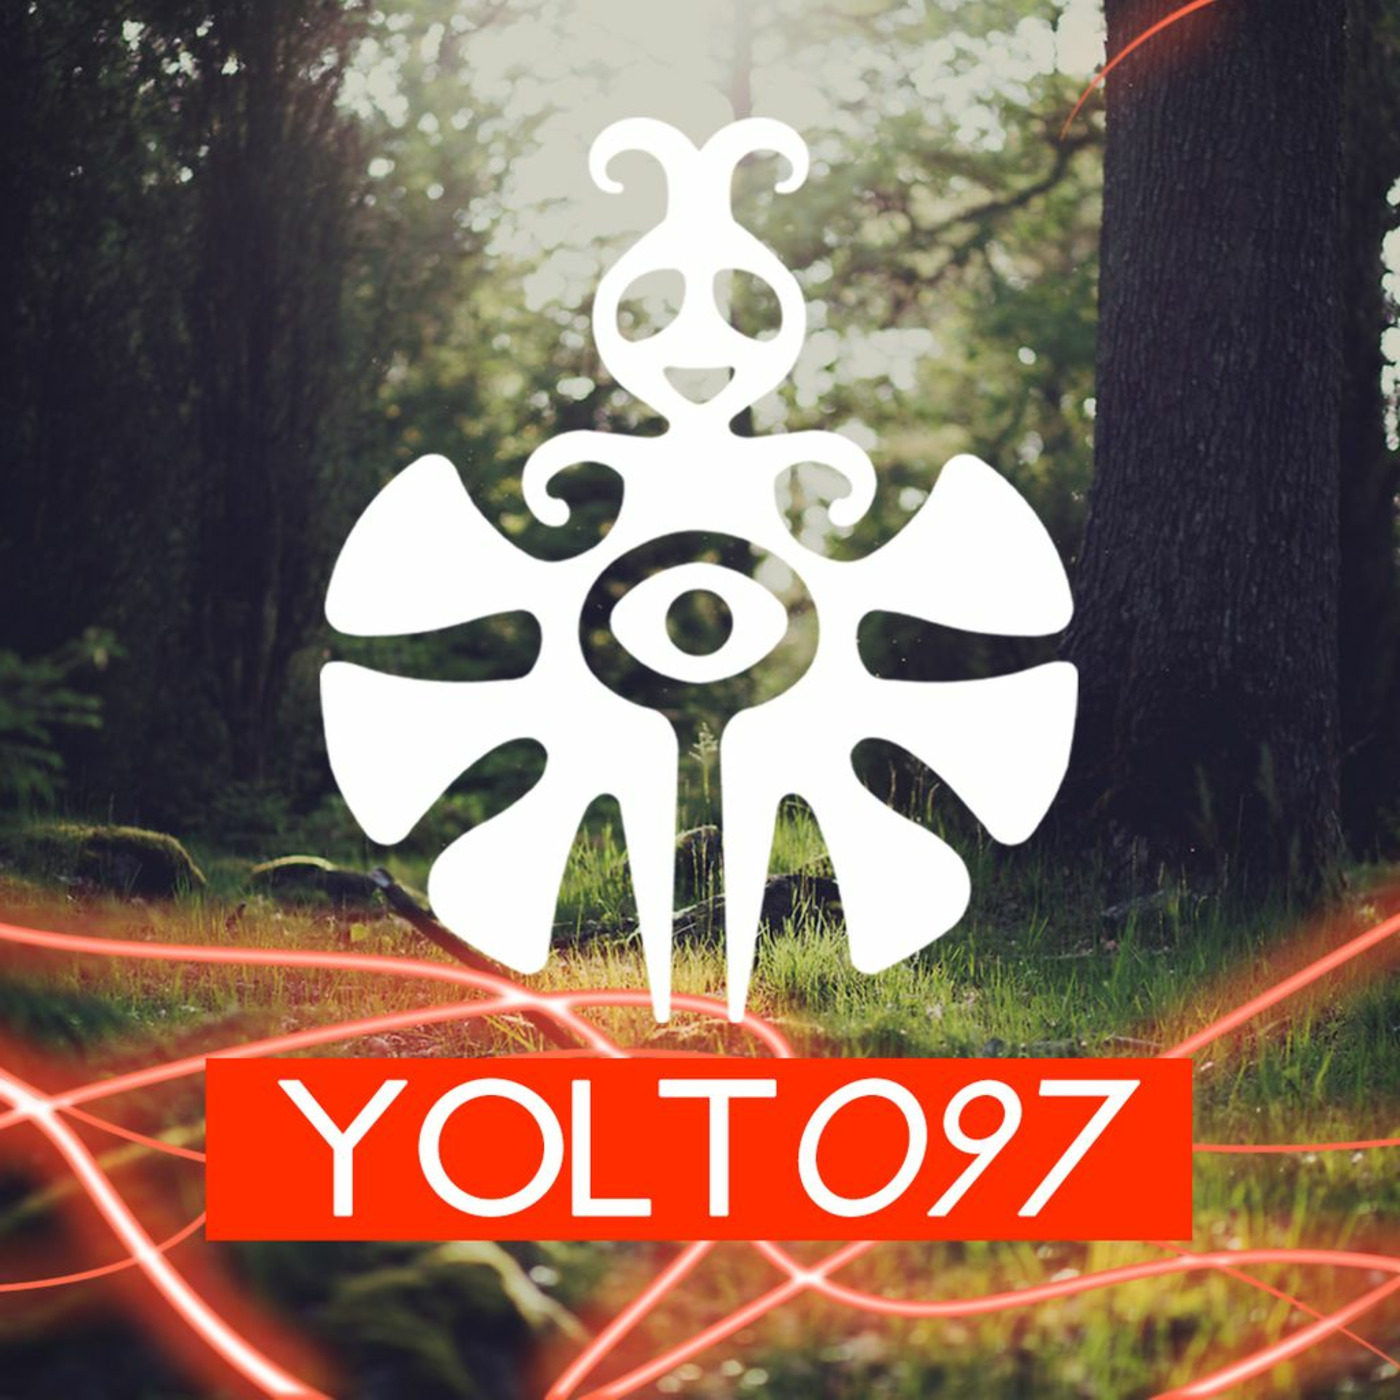 You Only Live Trance Episode 097 (#YOLT097) - Ness